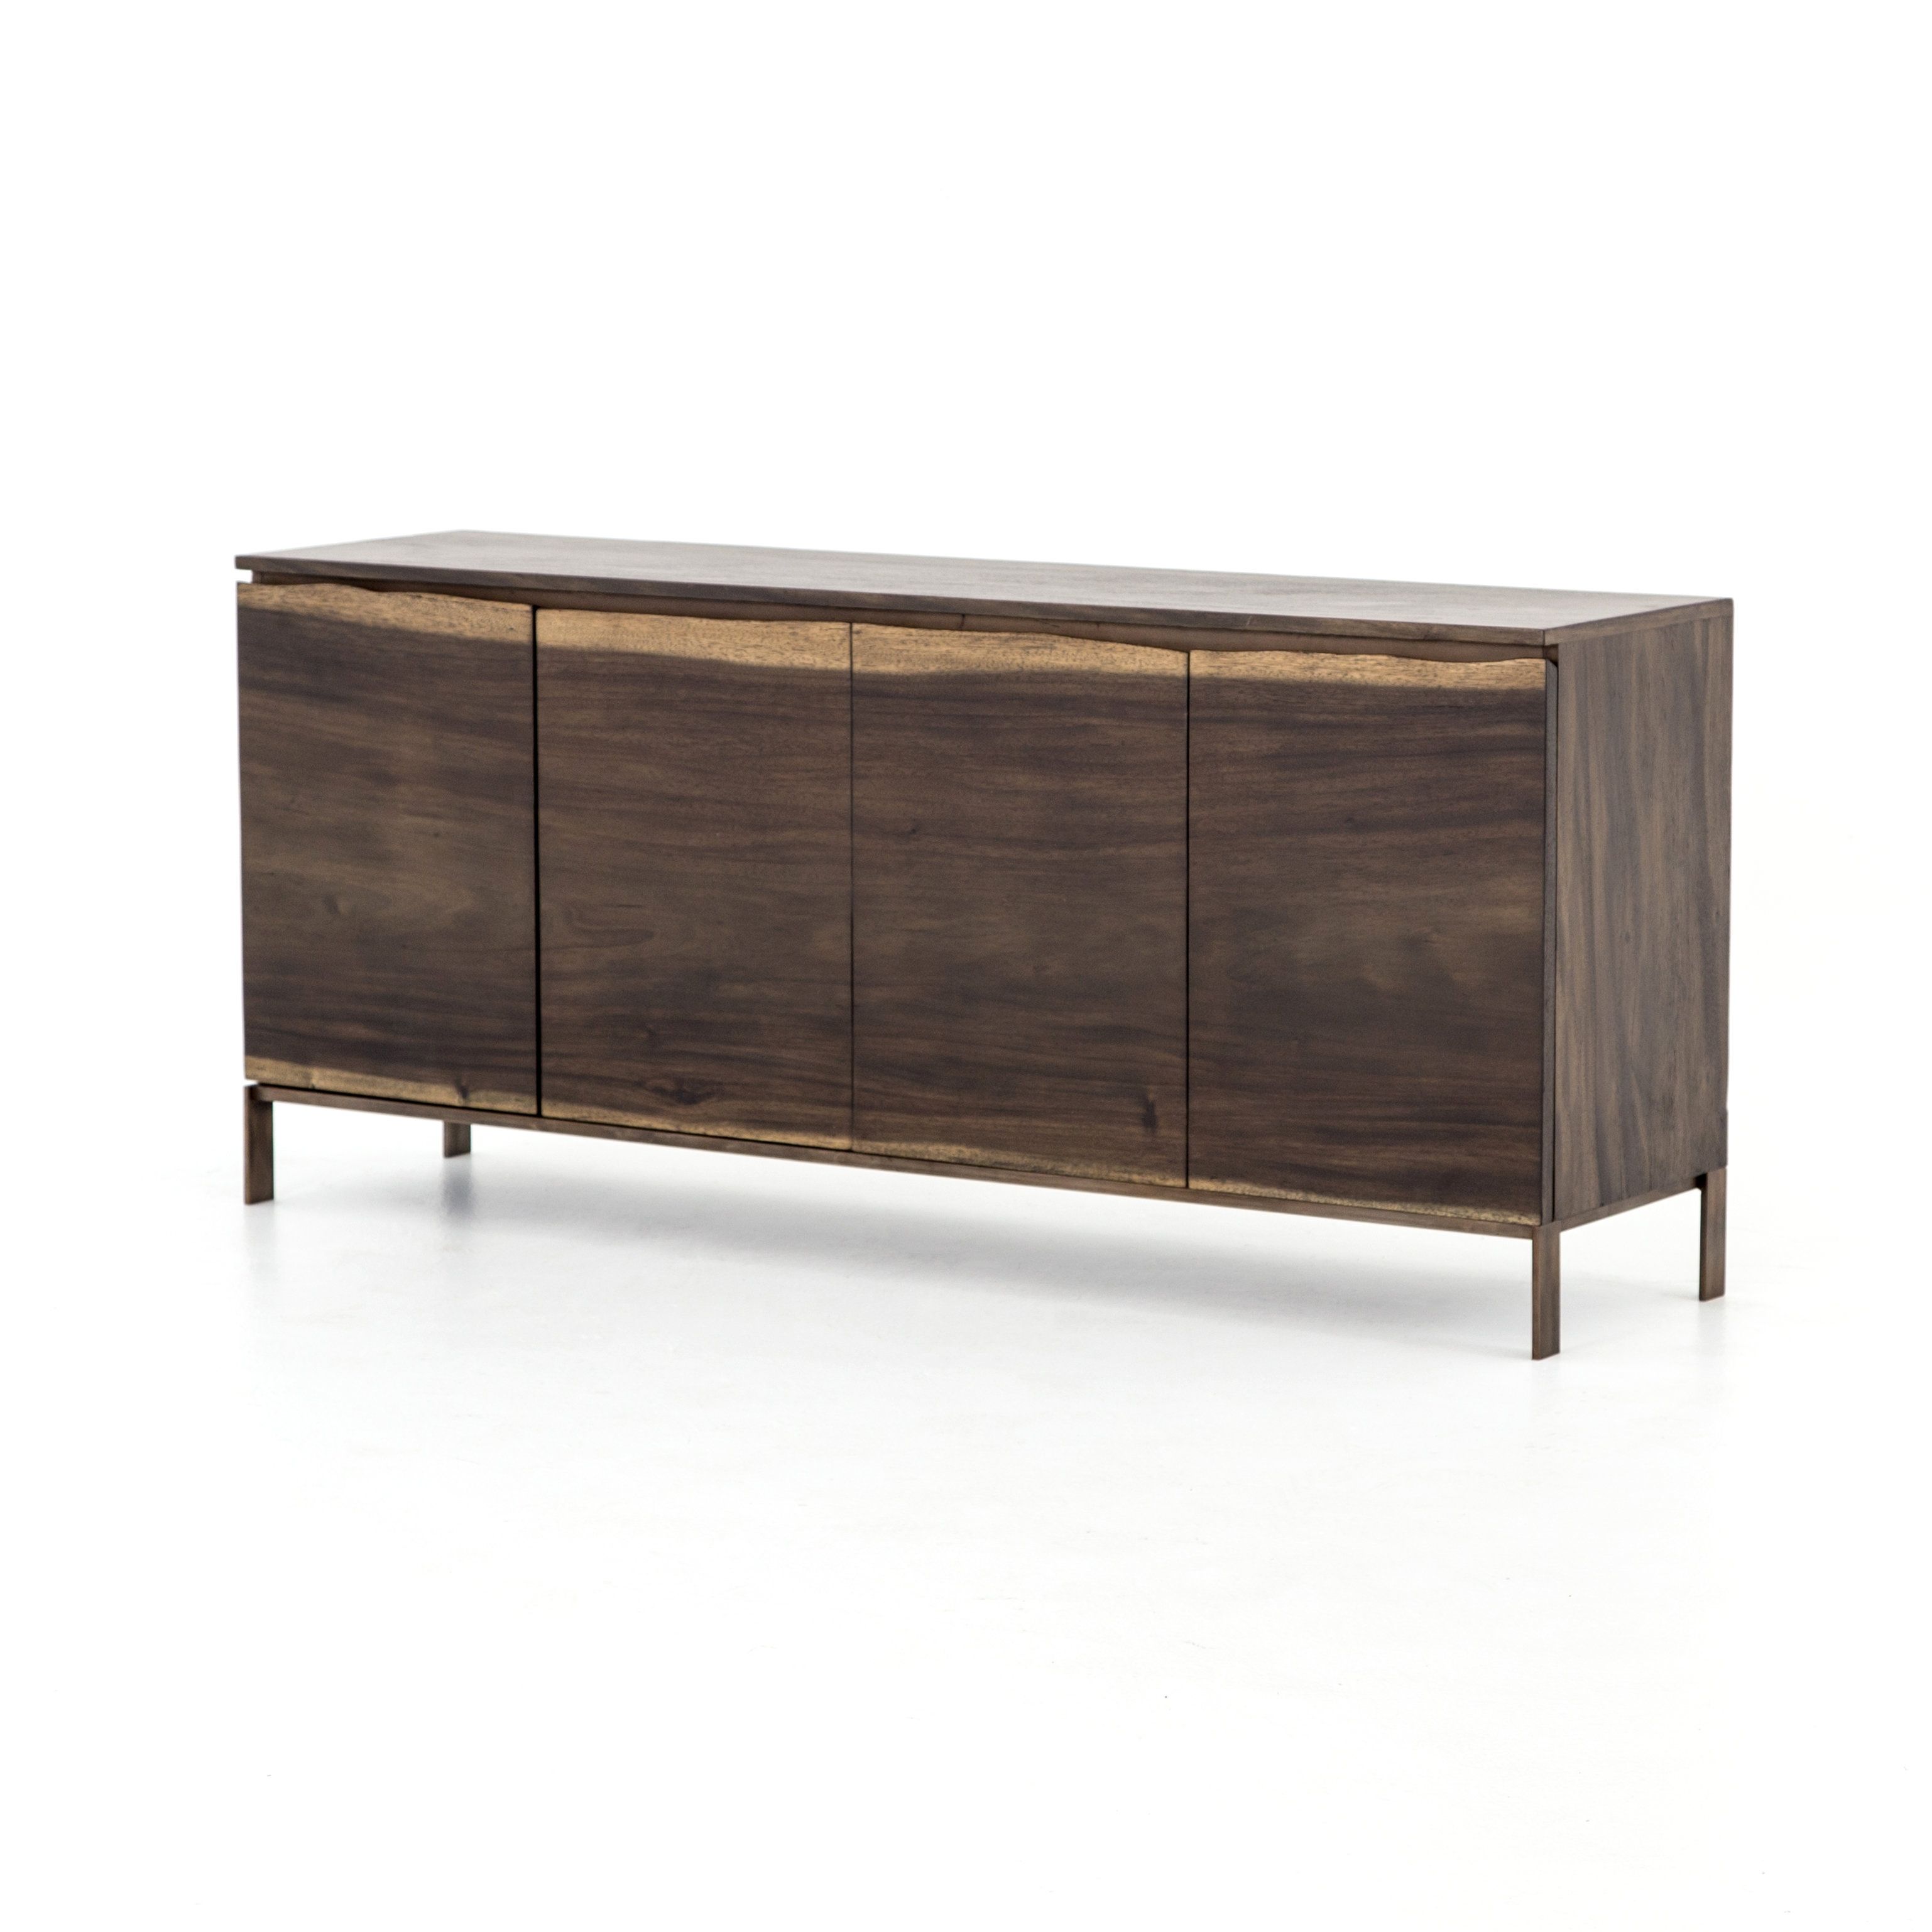 Foundry Select Attica Live Edge Sideboard | Wayfair In Latest Solar Refinement Sideboards (View 10 of 20)